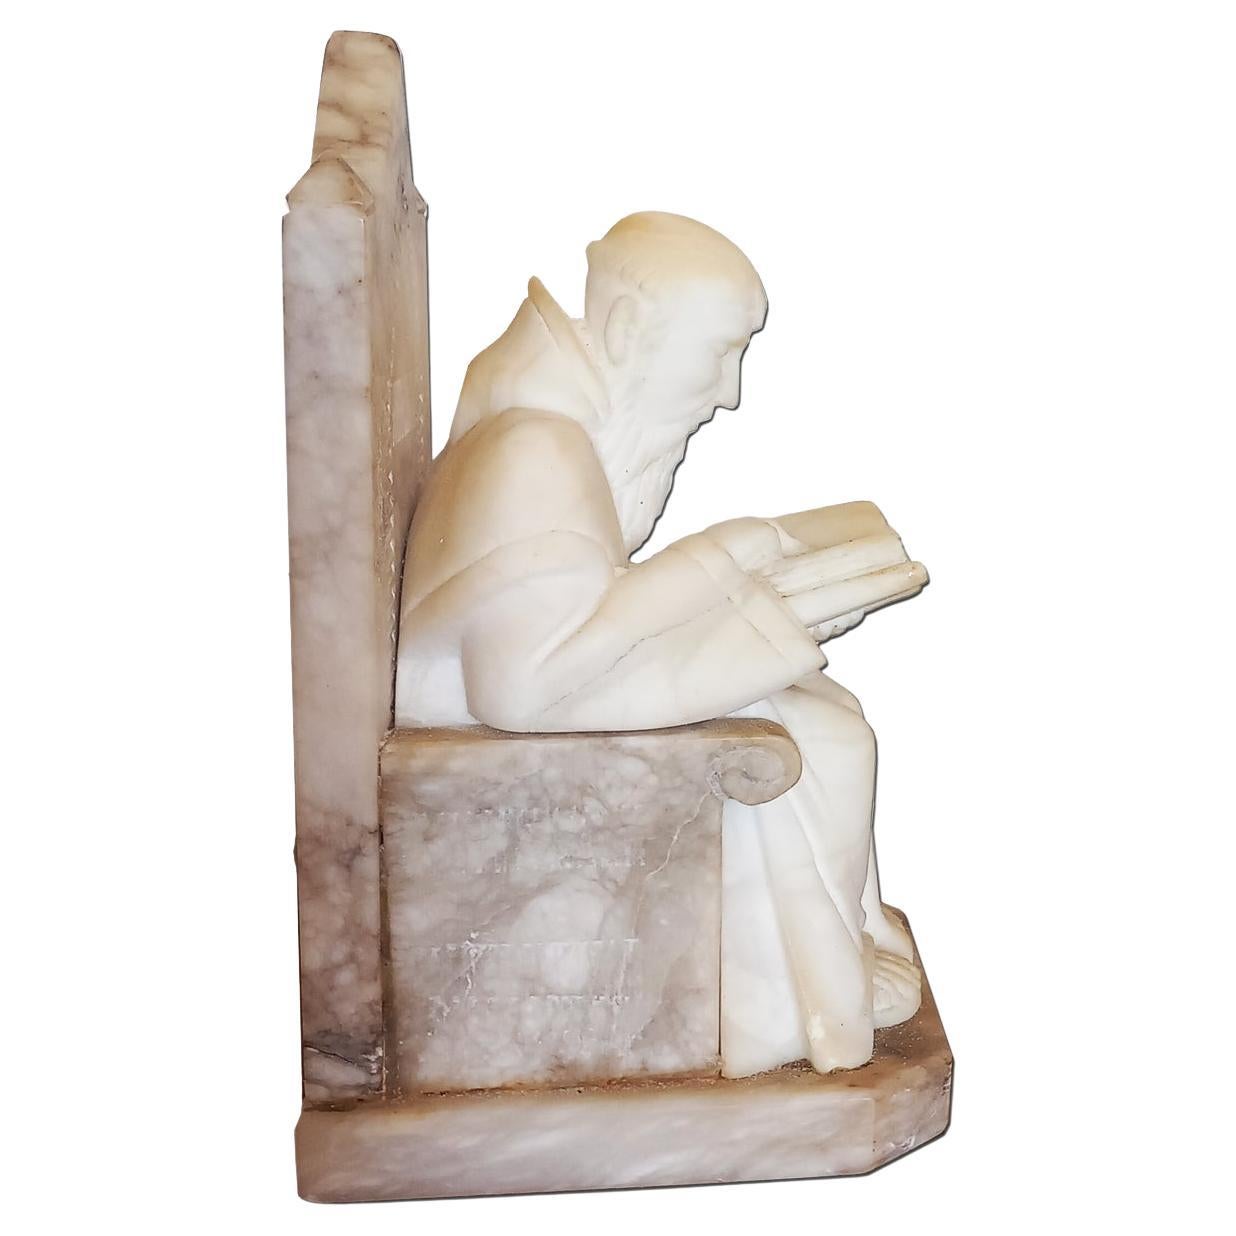 Library, Book, Throne, medieval, revival

Alabaster and marble bookends in the shape of monks sitting on a throne reading a book Medieval style figur of a monge carved on the albastro bench in Italian marble.

Library, Book, Throne, medieval,